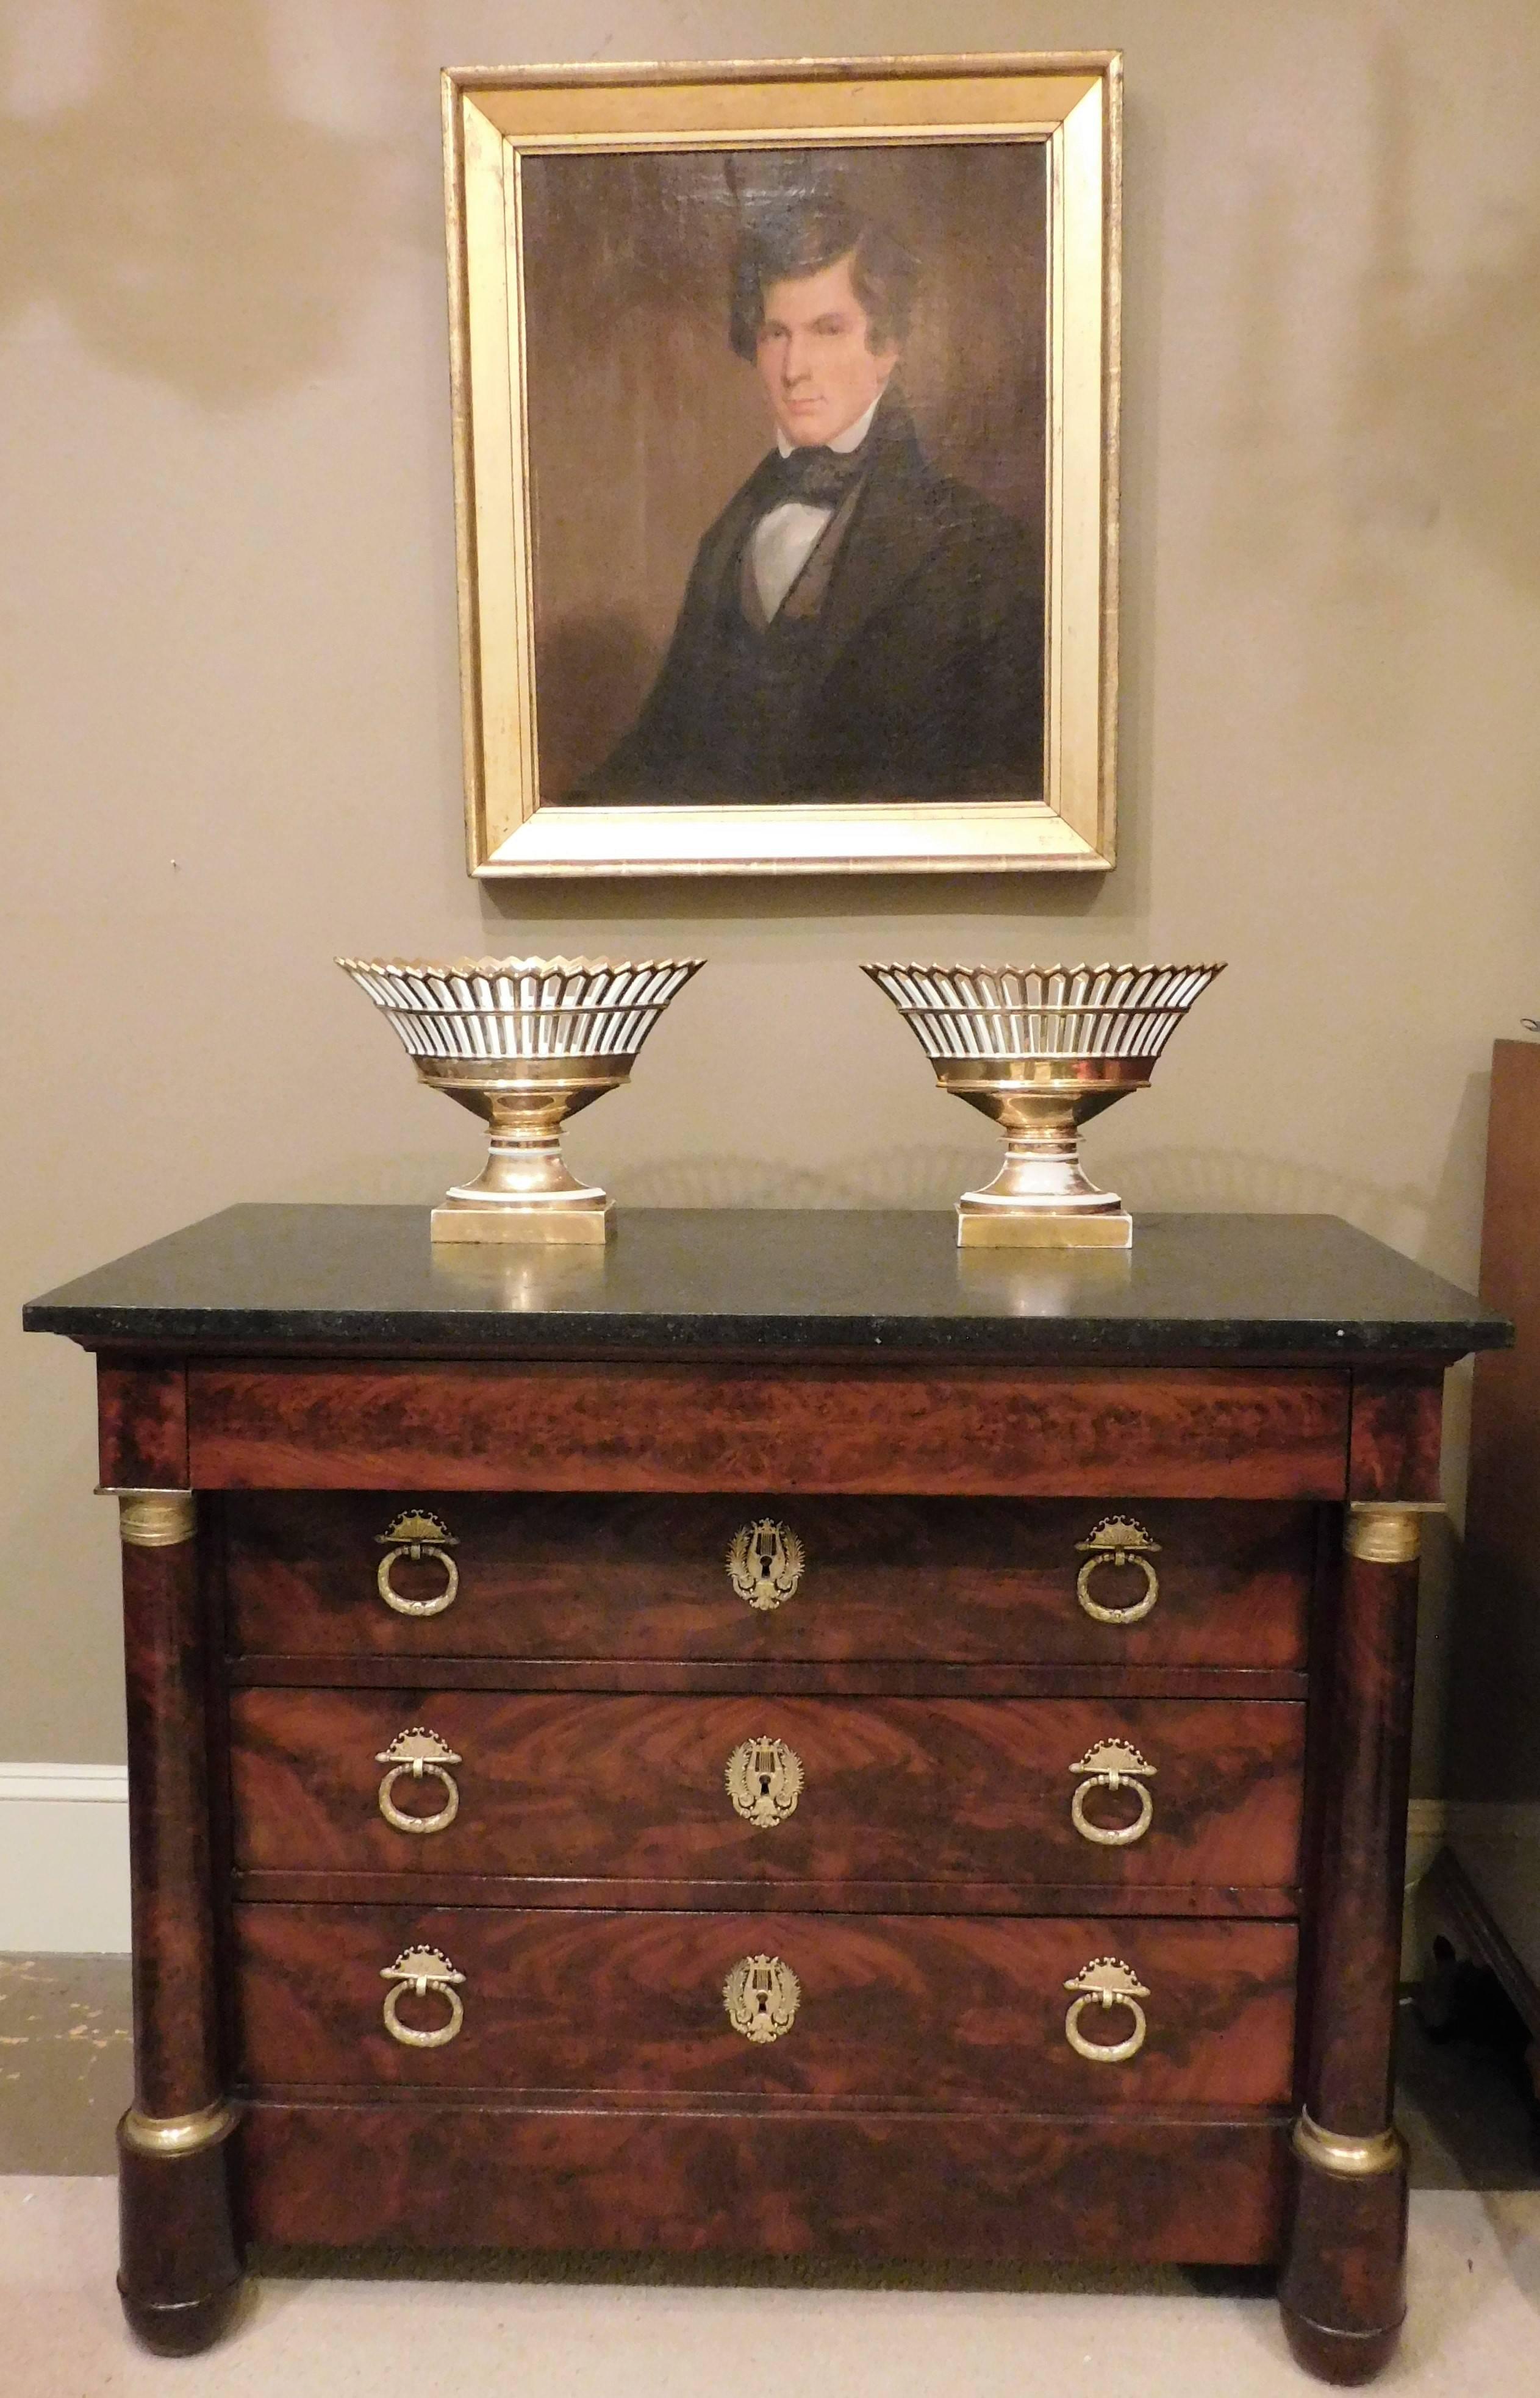 This commode (chest of drawers) has four drawers. The top drawer is opened by notches below and is divided into three sections; the second drawer is divided into two unequal-sized sections. It is made of French polished mahogany and mahogany